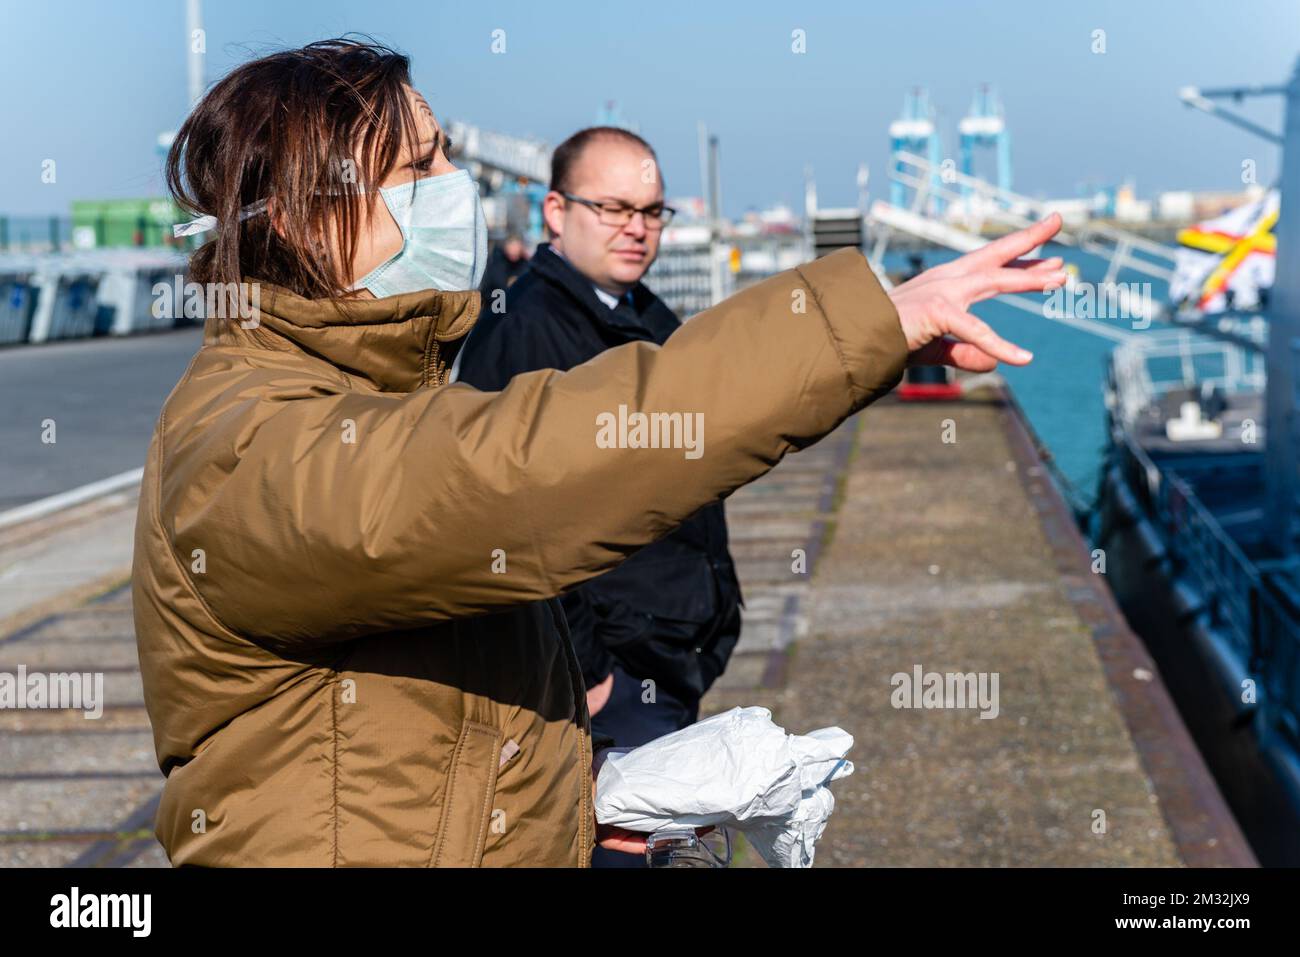 ATTENTION EDITORS - HAND OUT PICTURES - EDITORIAL USE ONLY - MANDATORY CREDIT HANDOUT DEFENSIE - DEFENCE TBN JORN URBAIN A woman wearing a mouth mask, pictured at the arrival of Belgian frigate Leopold 1 in Zeebrugge, Friday 27 March 2020. One of the sailors on the frigate has a confirmed Corona virus infection and has left the ship earlier. Due to the strict measures following such an infection, the ship has returned earlier from its mission and all non-infected sailors must now stay in home quarantine. BELGA PHOTO HANDOUT DEFENSIE - DEFENCE TBN JORN URBAIN  Stock Photo